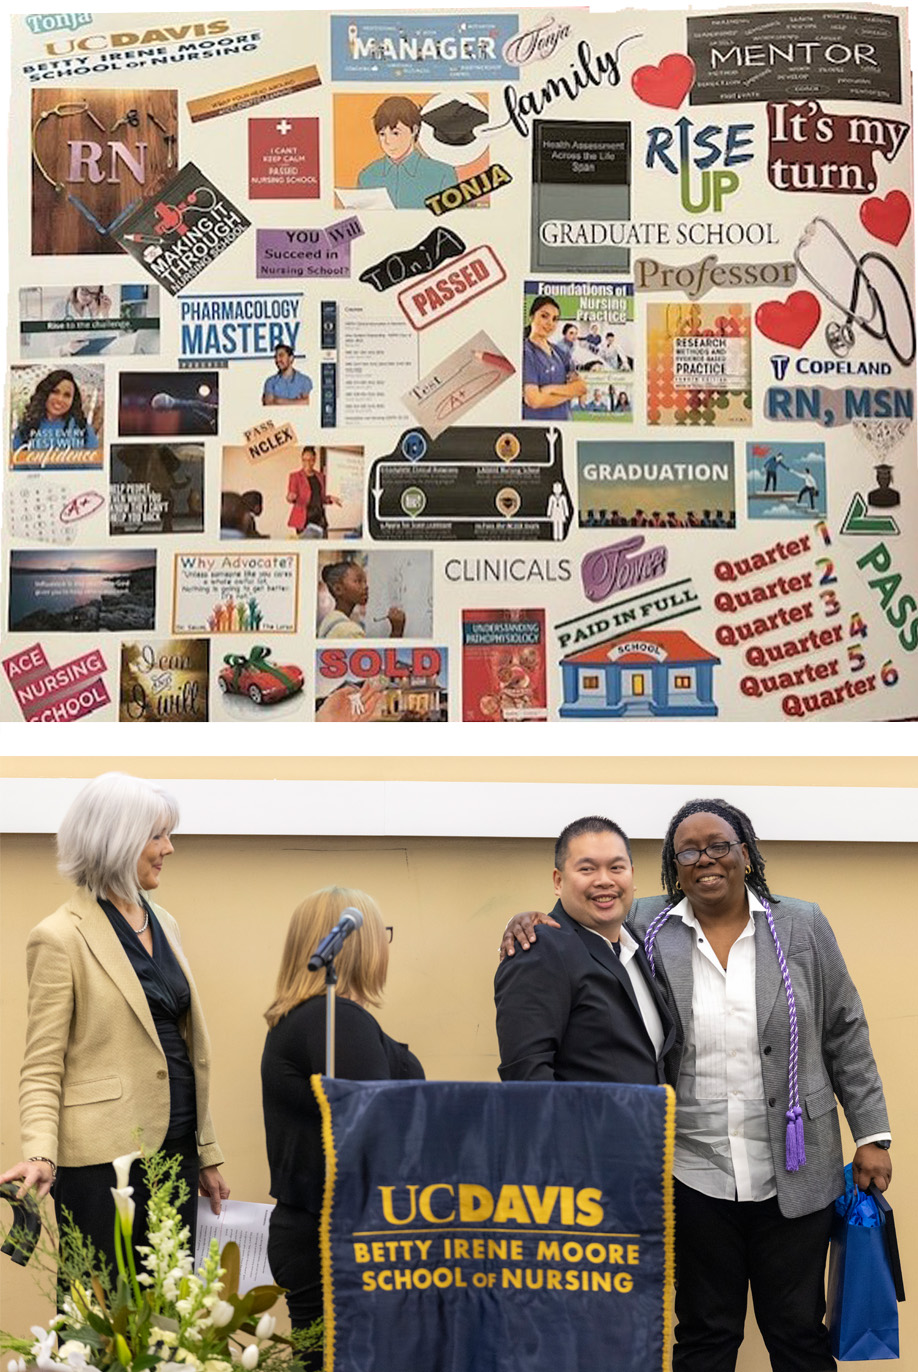 On top: a vision board with cut-out photos and quotes for inspiration; on bottom, Tonja Copeland, right, with arm around a mentor and two onlookers at podium receiving Star Student Nurse Award.